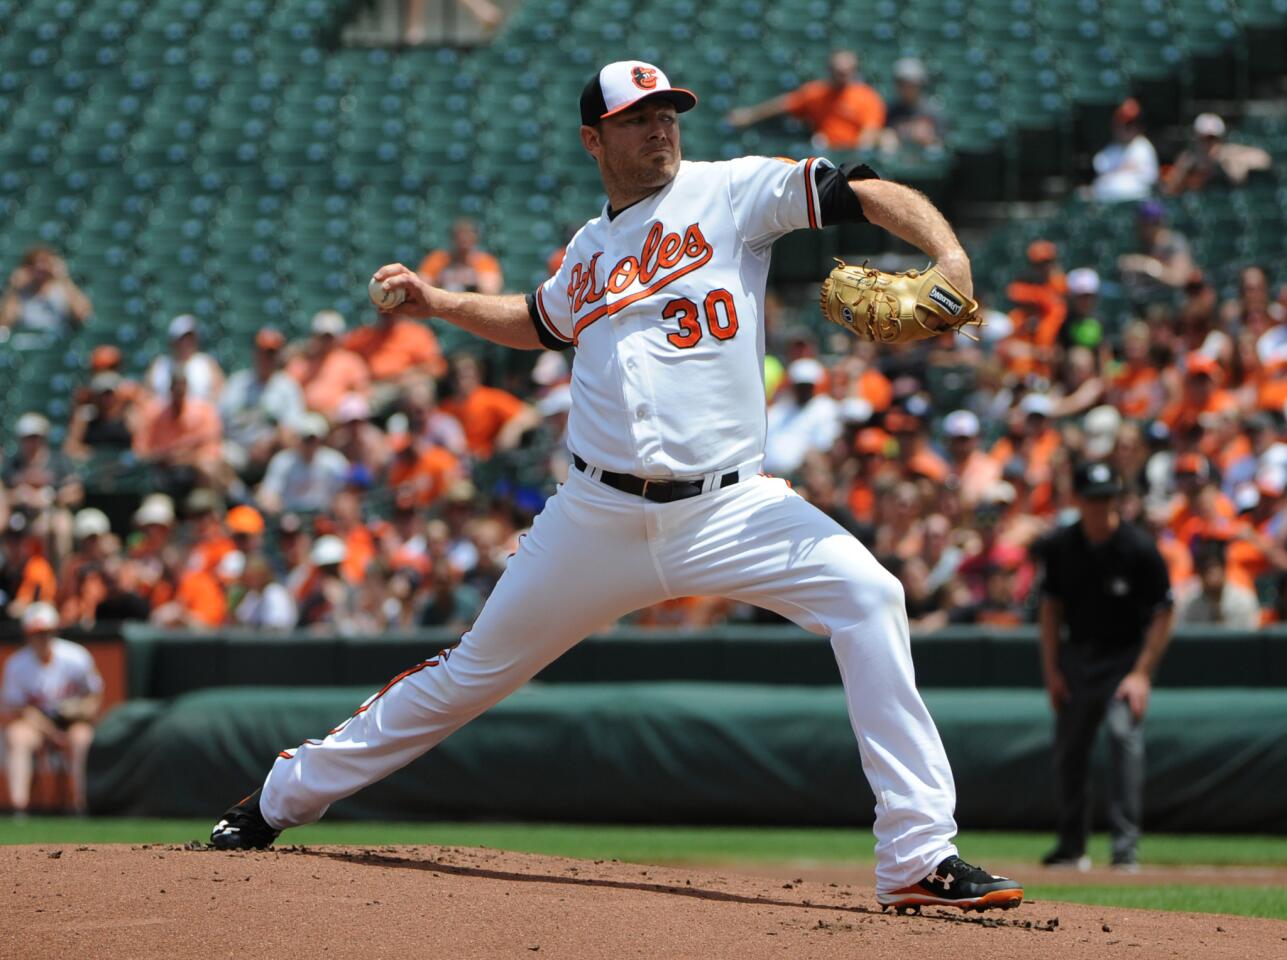 Orioles starting pitcher Chris Tilman in the first inning.